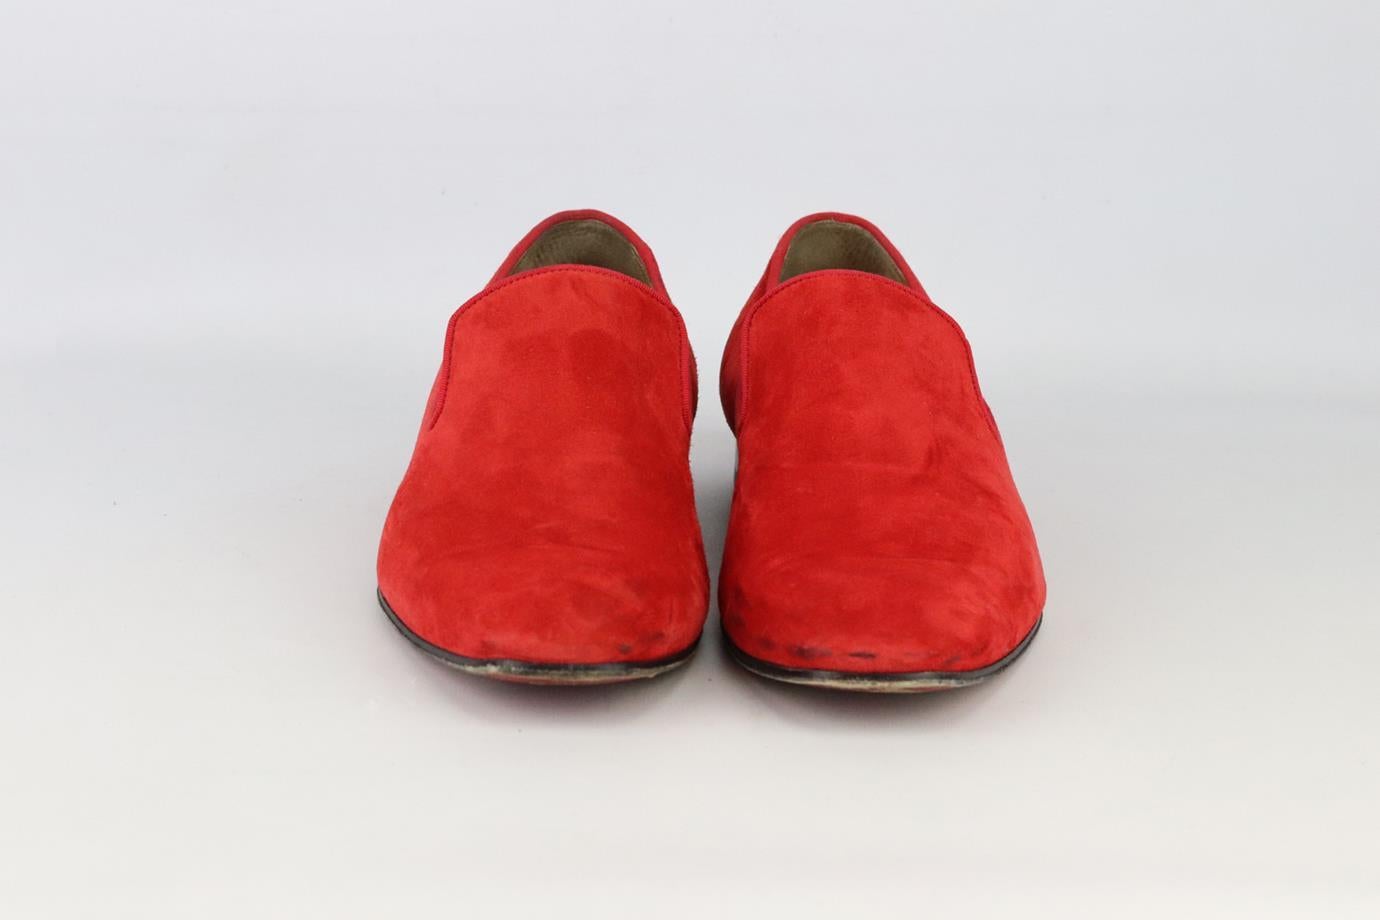 Christian Louboutin Dandelion suede loafers. Made from red suede in a classic loafer shape set on the brand’s iconic red sole. Red. Slip on. Does not come with box or dustbag. Size: EU 43.5 (UK 9.5, US 10.5). Insole: 11.2 in. Heel: 0.75 in